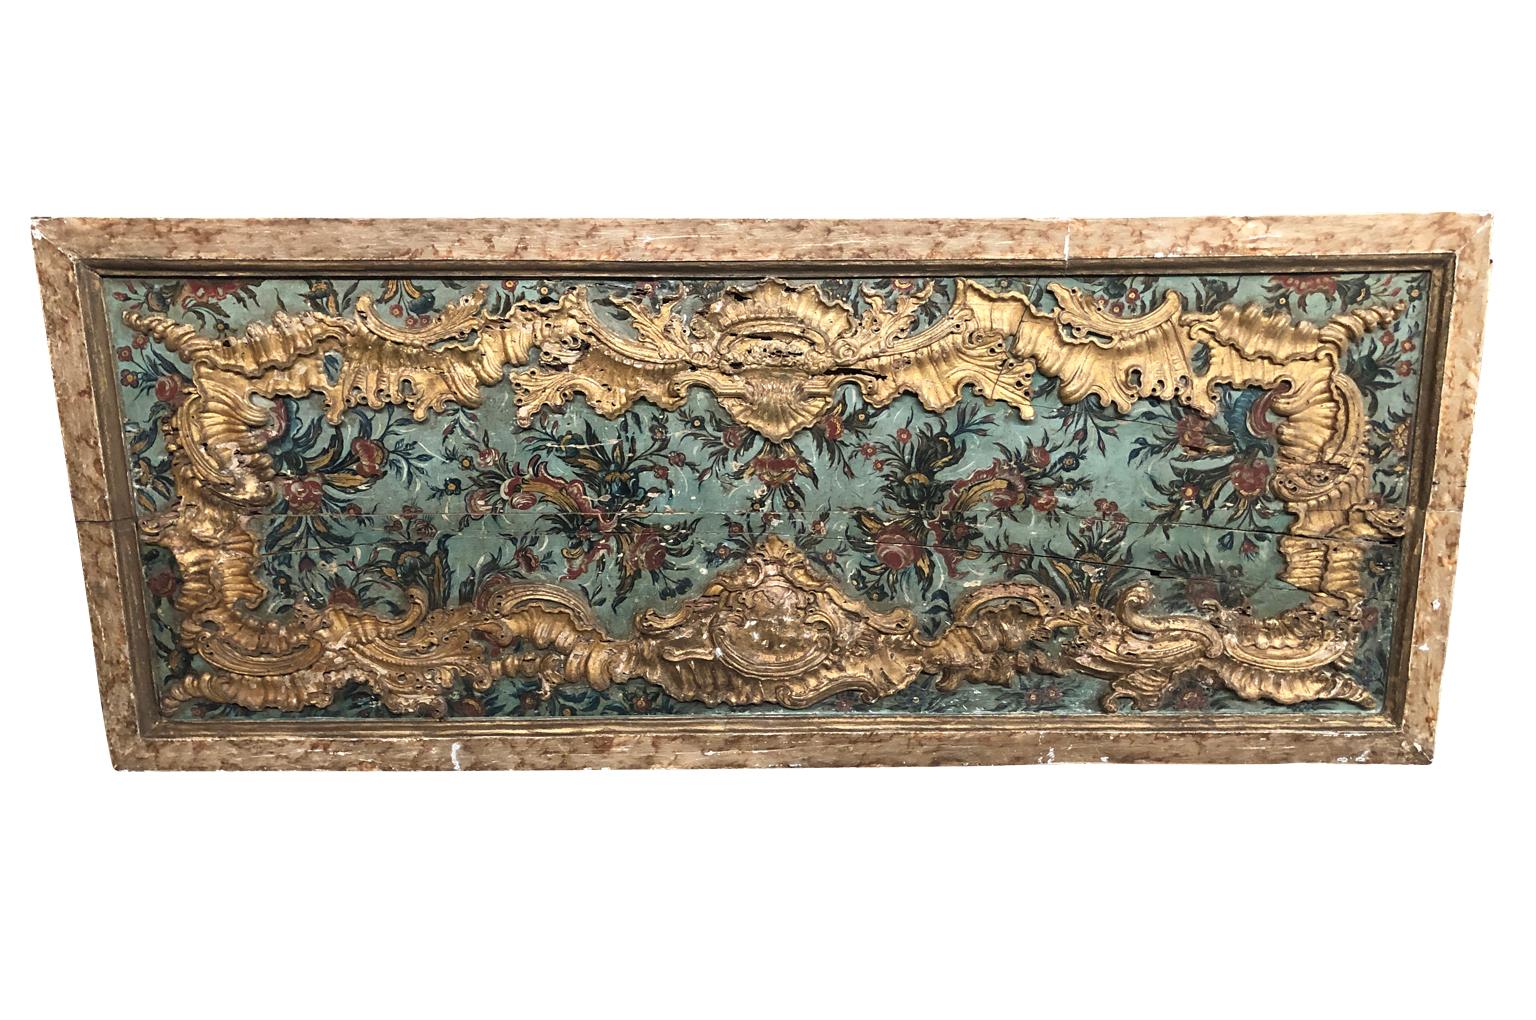 An exceptional 18th century boiseries panel from Portugal in polychromed and giltwood. Stunning color and wonderful patina. Perfect as a headboard or to build in.